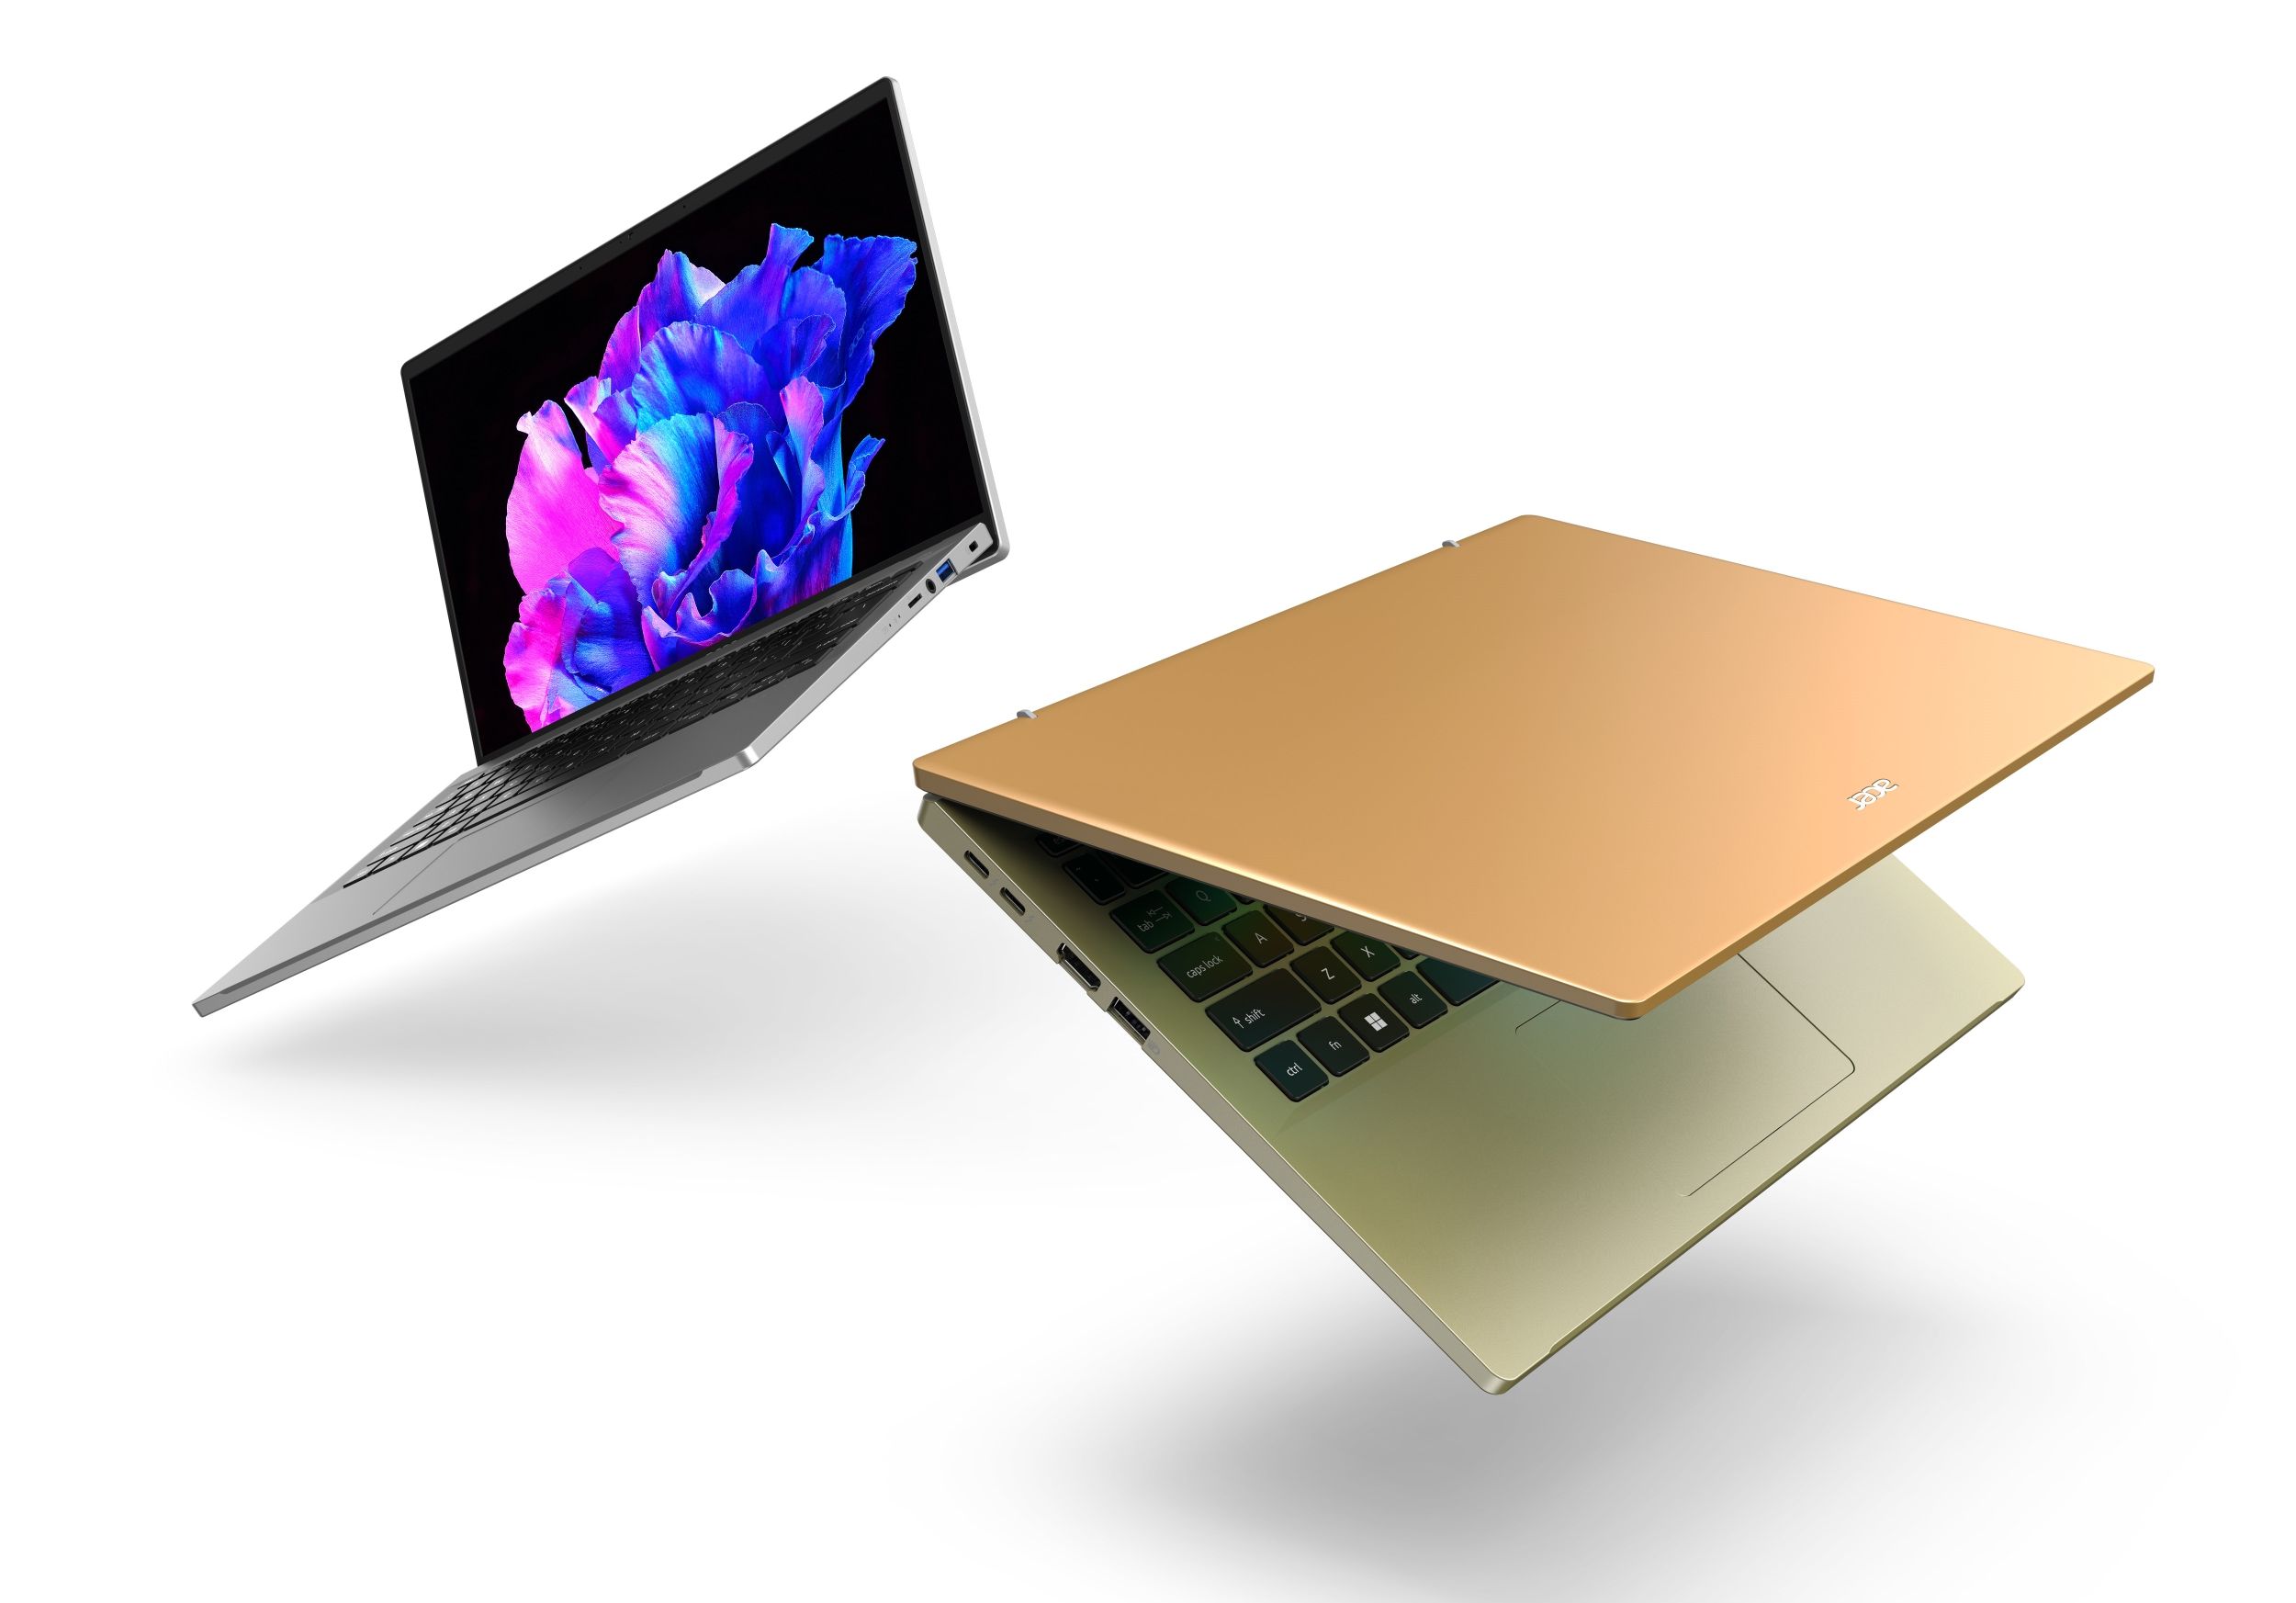 Acer Launches Impressive New Swift Go and Predator Helios Laptops at